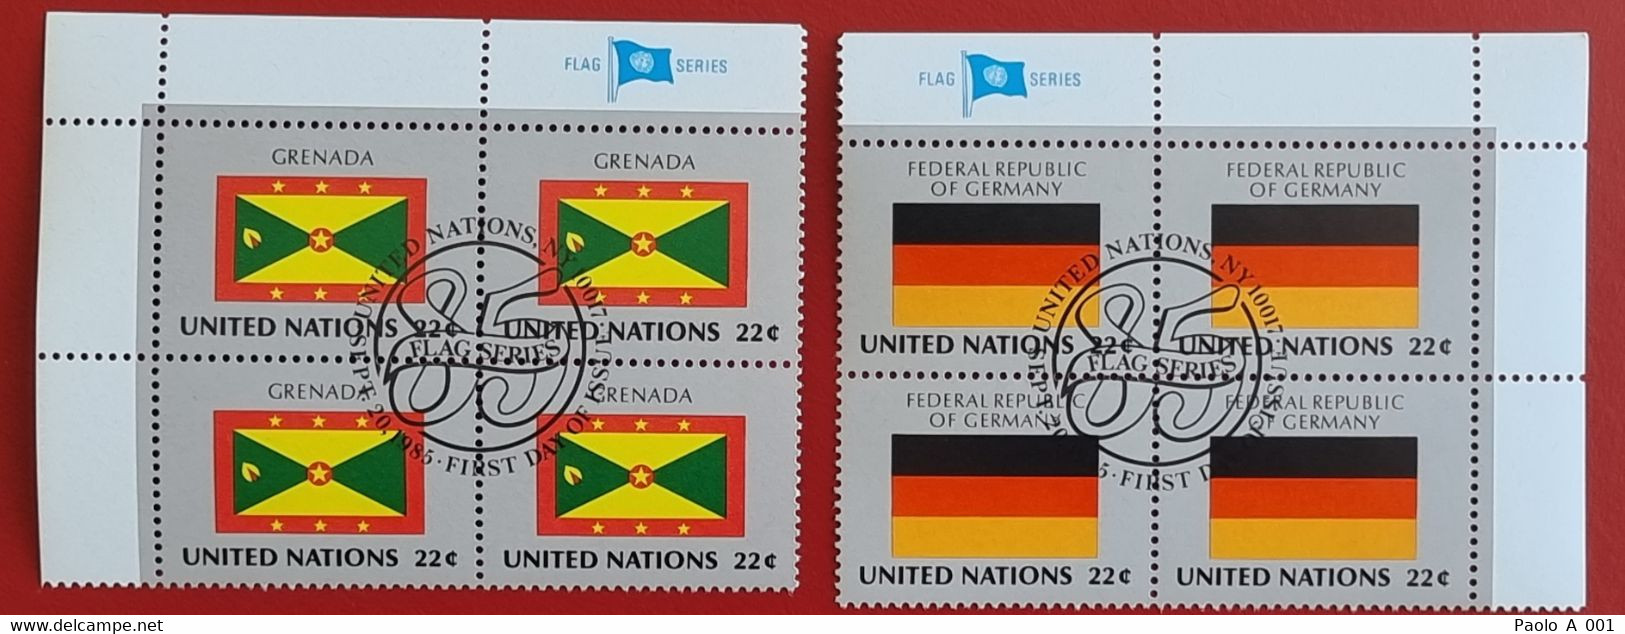 UNO NEW YORK 1985 DEUTSCHLAND GERMANY EUROPE GRENADA AMERICA FLAG OF NATIONS BLOC OF FOUR FIRST DAY FULL GUM - Oblitérés